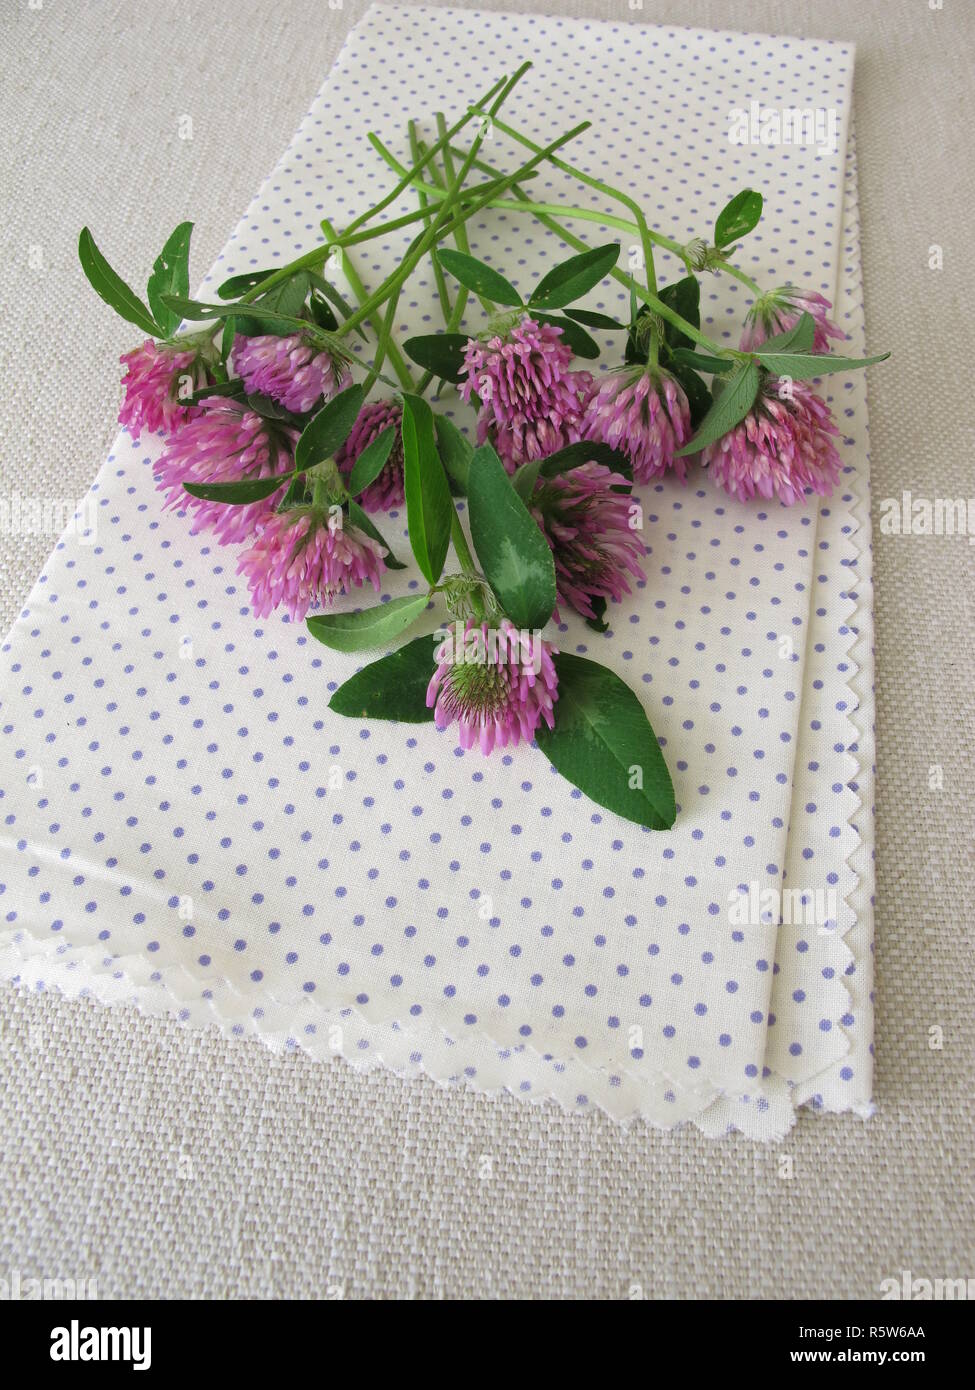 a bouquet of red clover Stock Photo